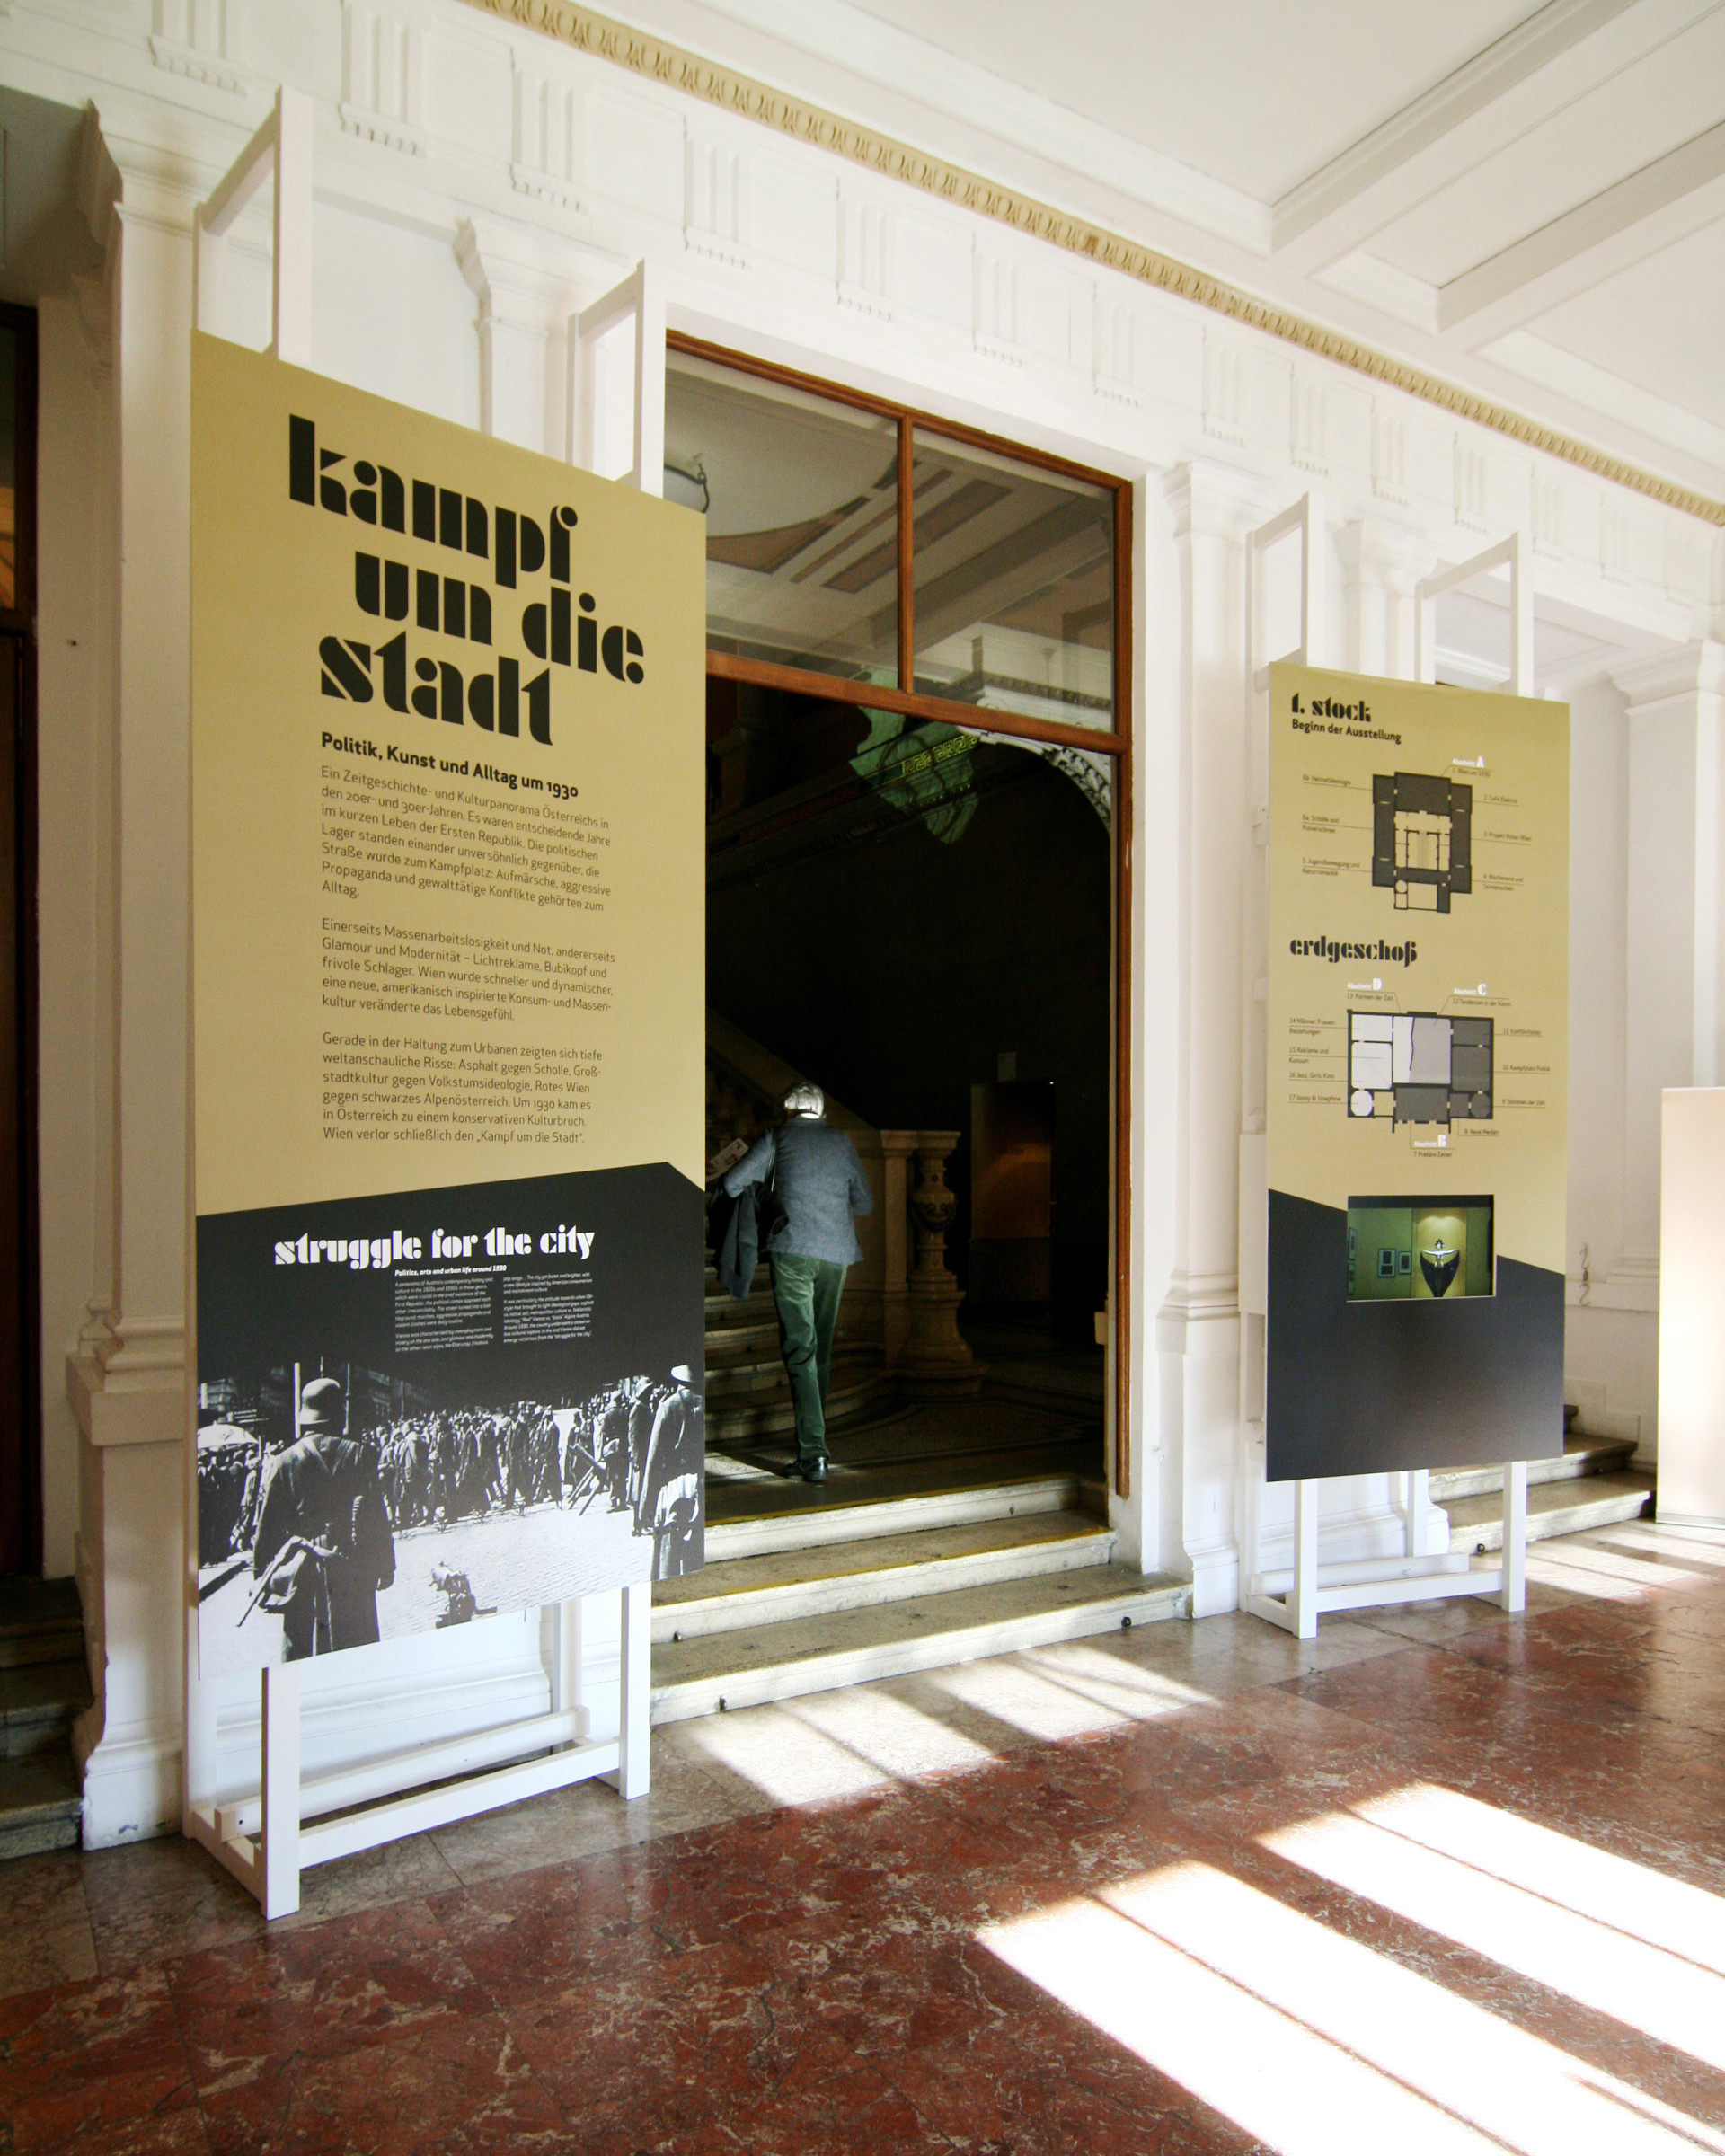 The typeface in the context of the exhibition for exhibition texts